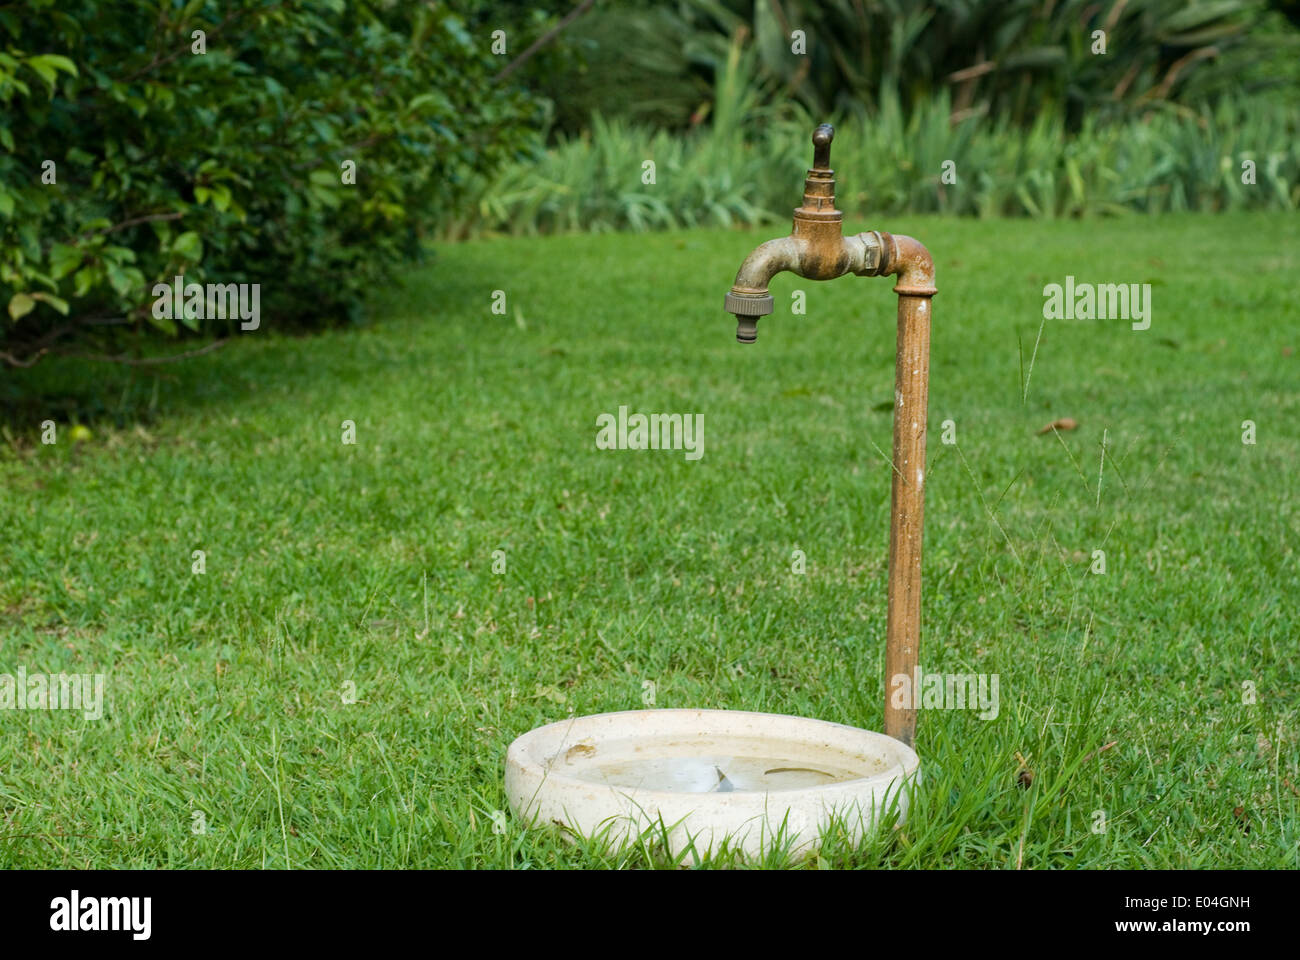 Outdoor private garden tap with water bowl Stock Photo